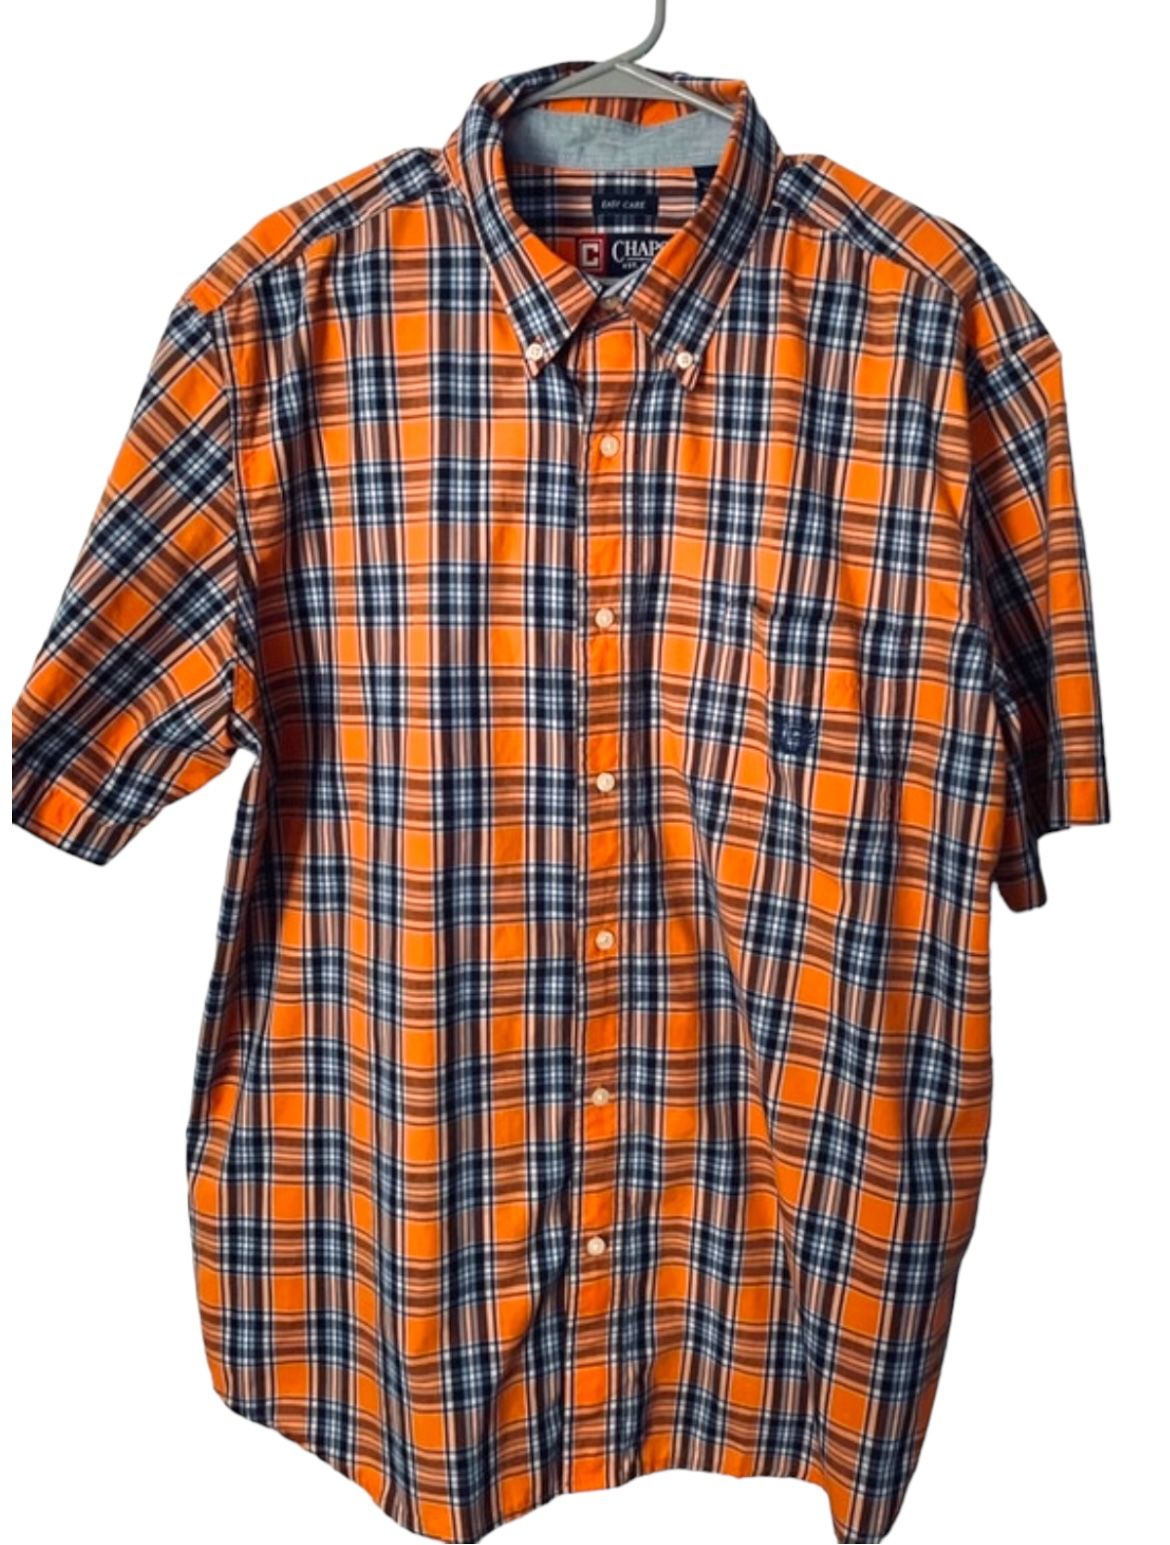 Chaps Easy Care Plaid Short Sleeve 2XL Shirt Mens Orange, Navy And White